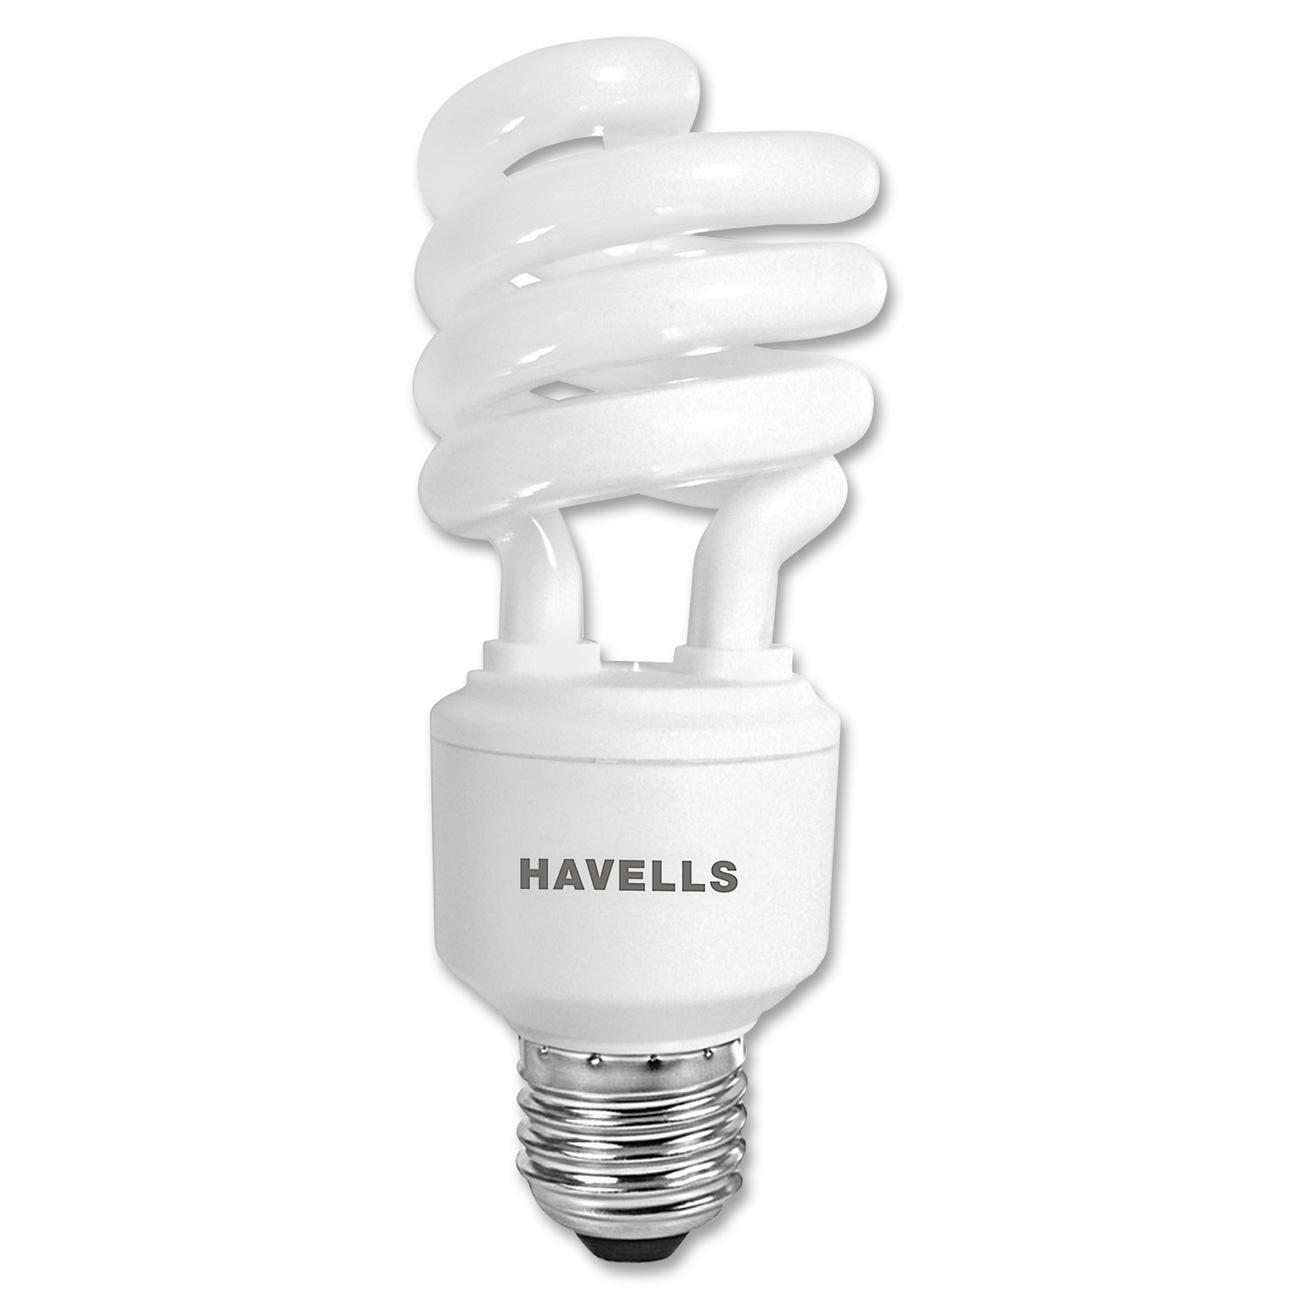 Havells 23W Spiral Compact Fluorescent Bulb